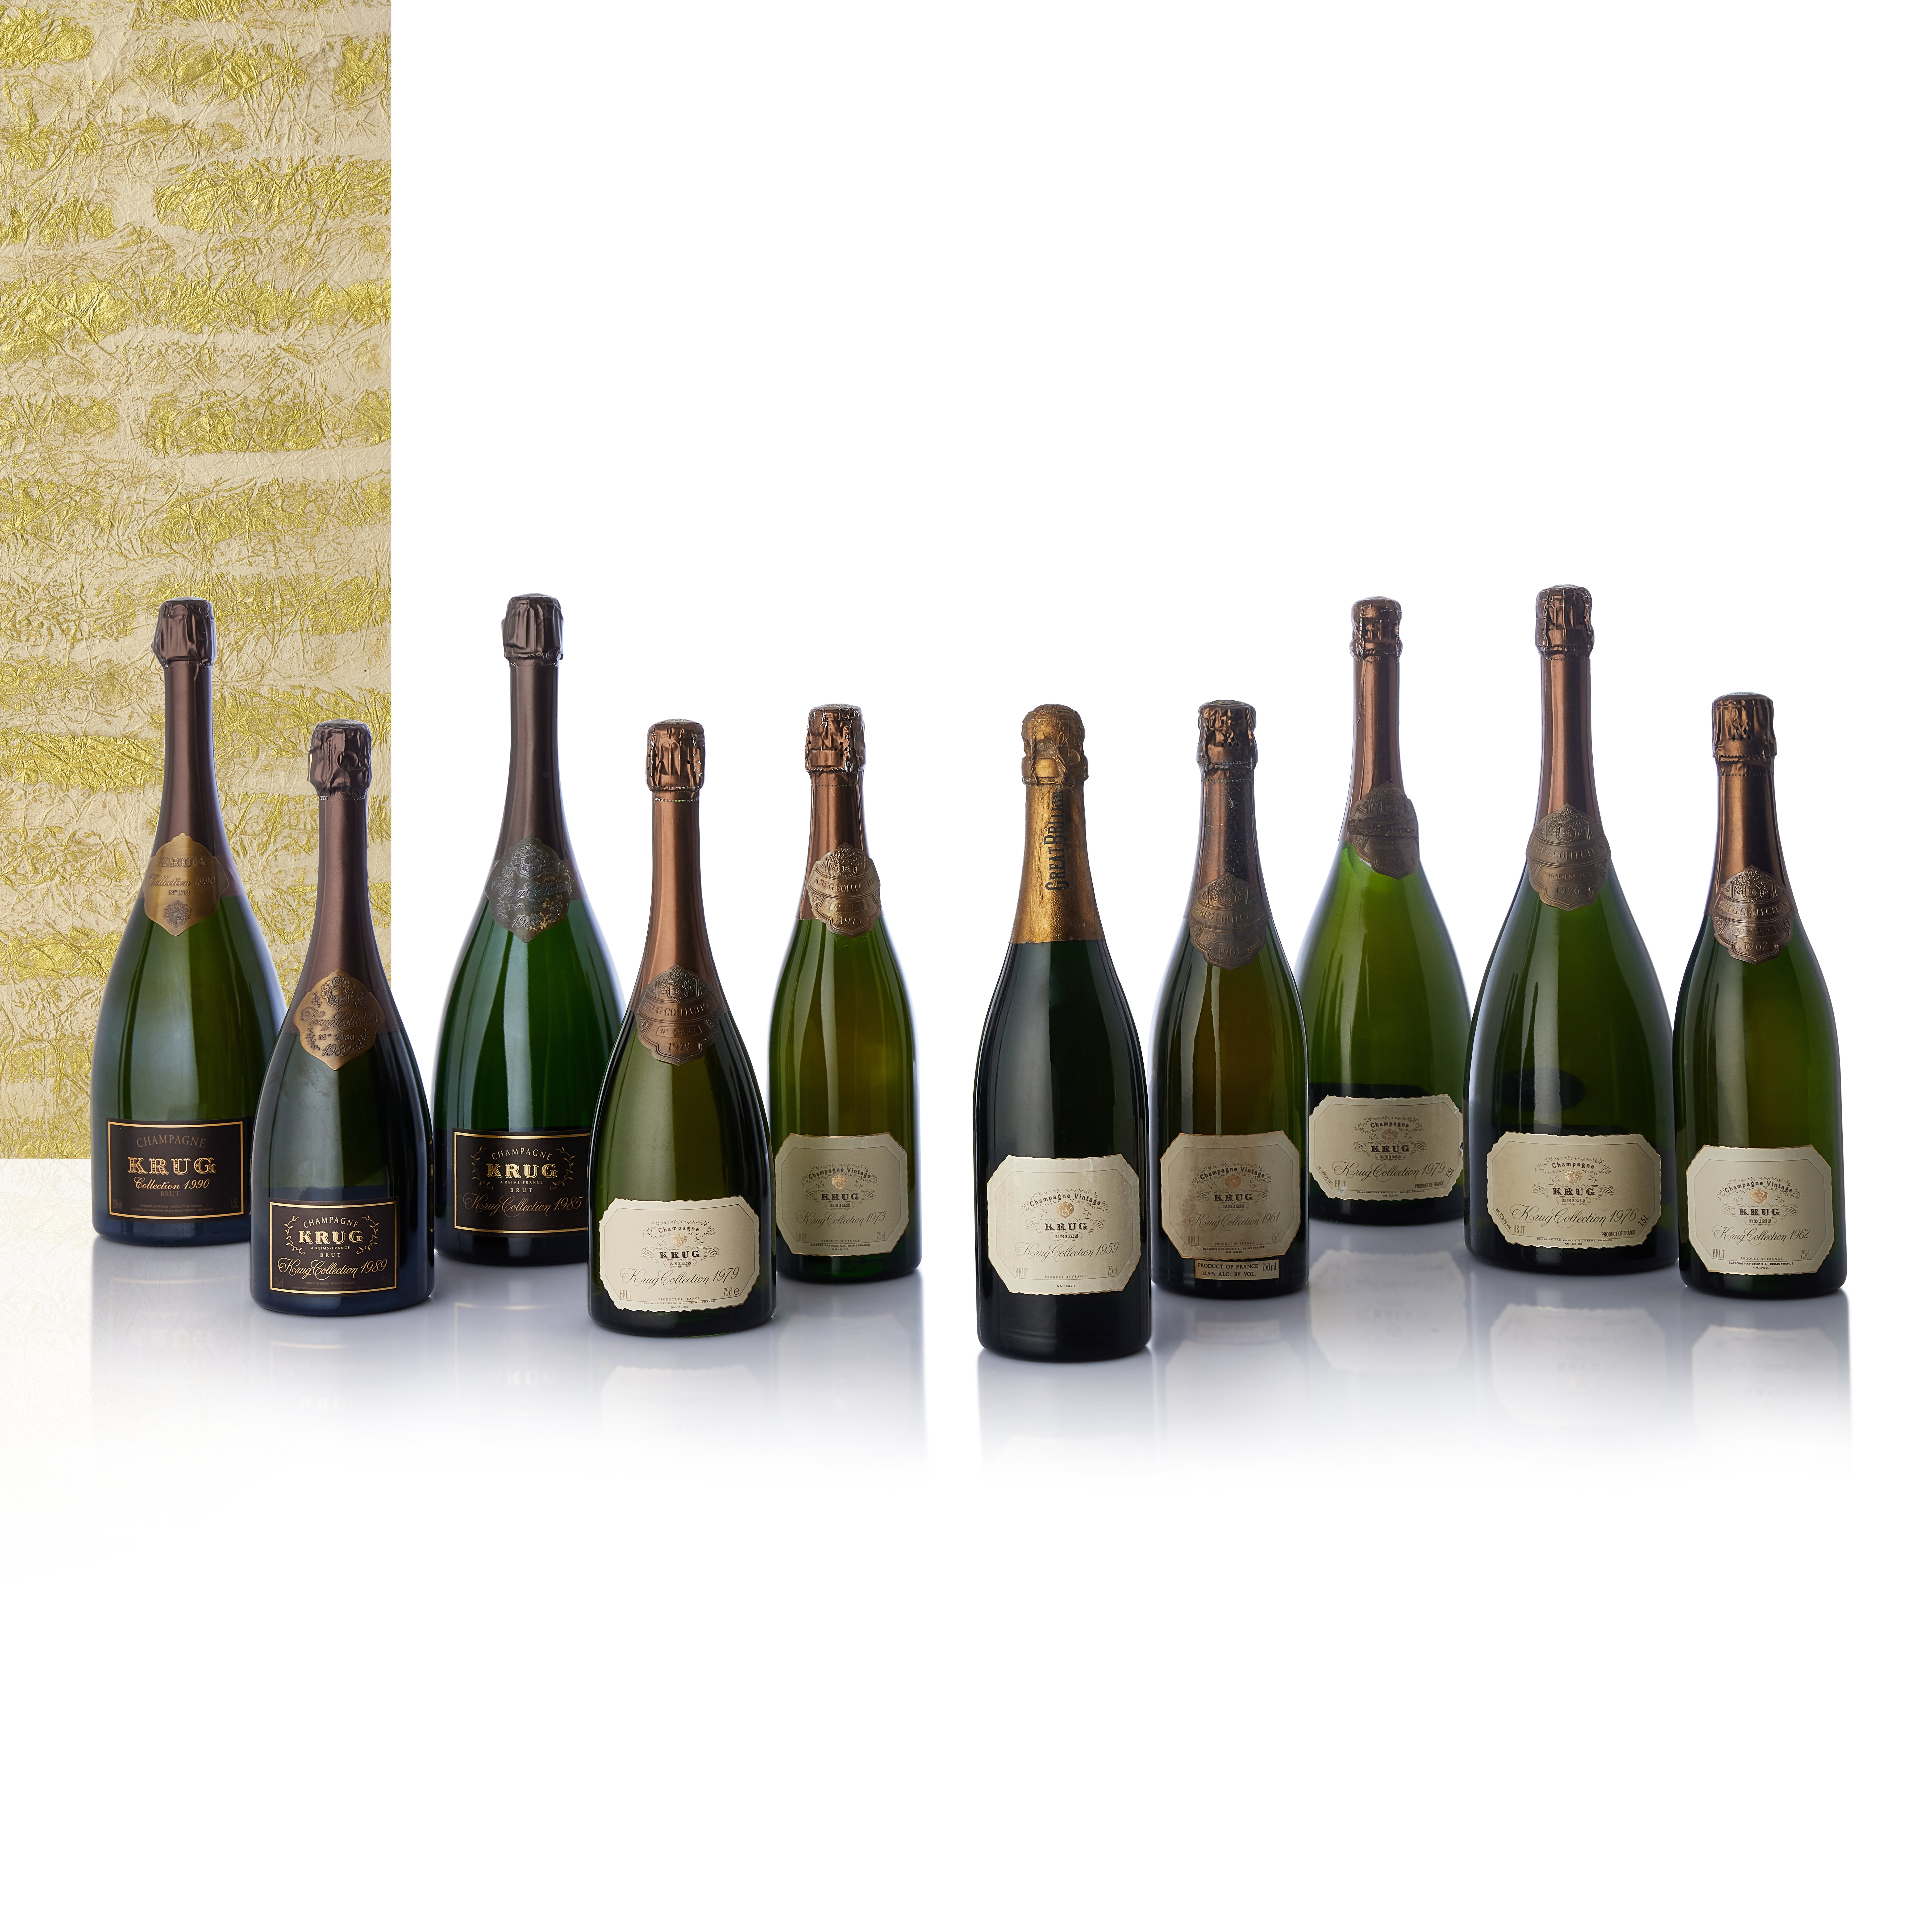 This collection of Krug bottles of champagne dating back as far as 1959 will be up for sale